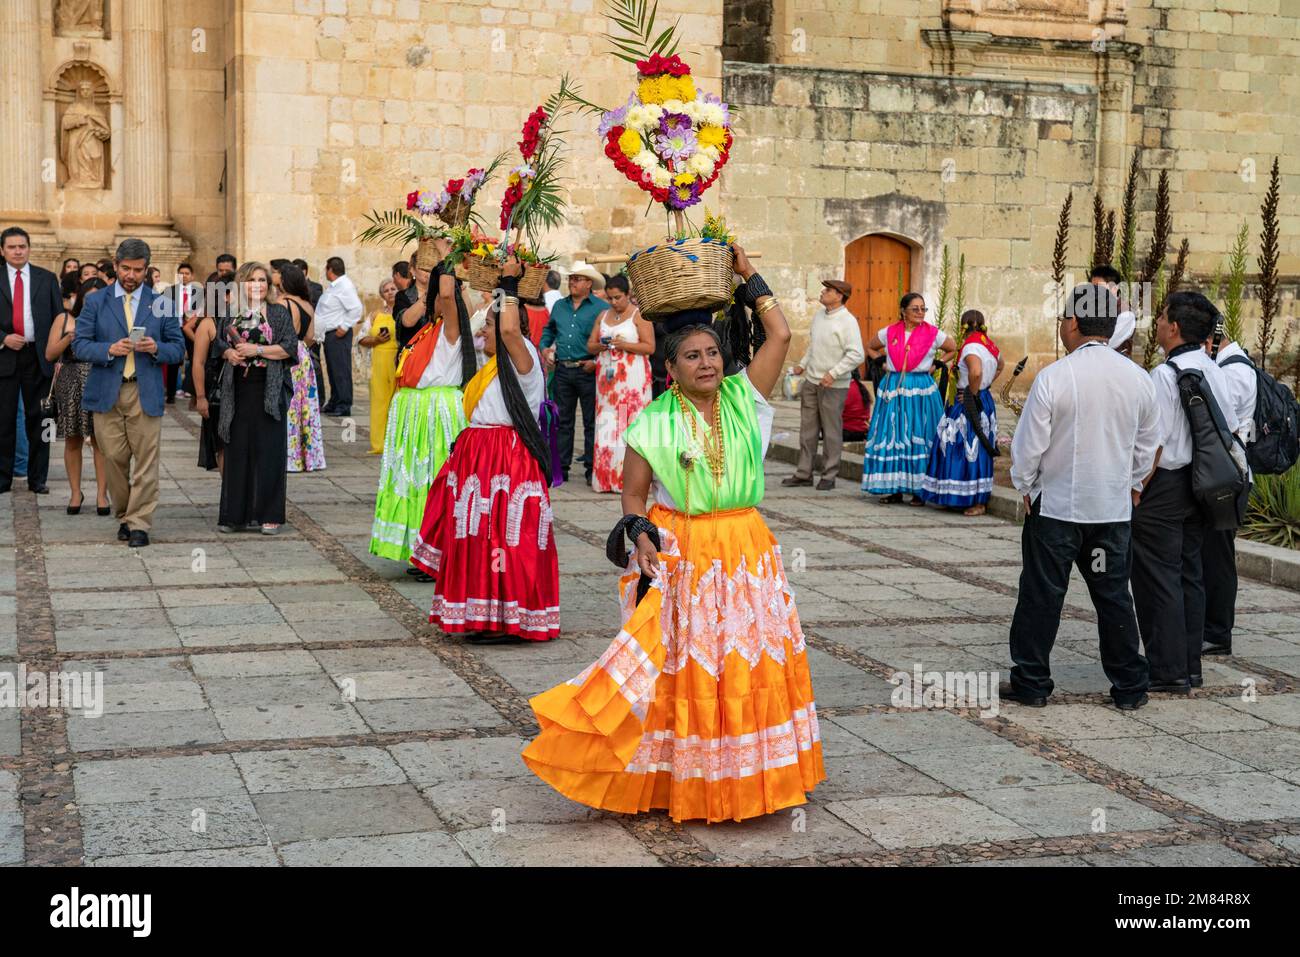 Canastera dancers with their flower baskets dance at a wedding ...